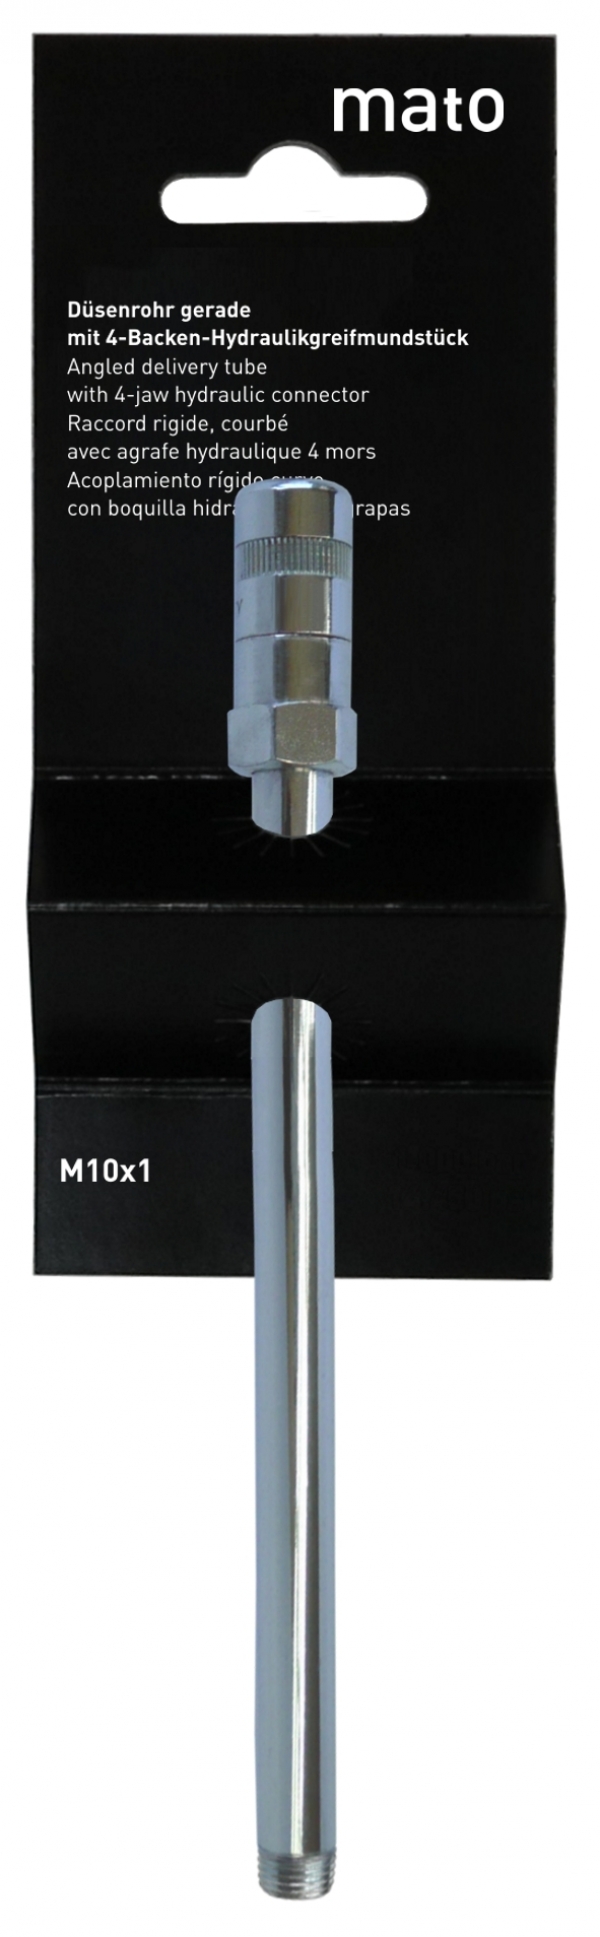 Delivery tube with 4-jaw hydraulic connector R1/8&quot;<br>PoS-design retail package, paper-headcard